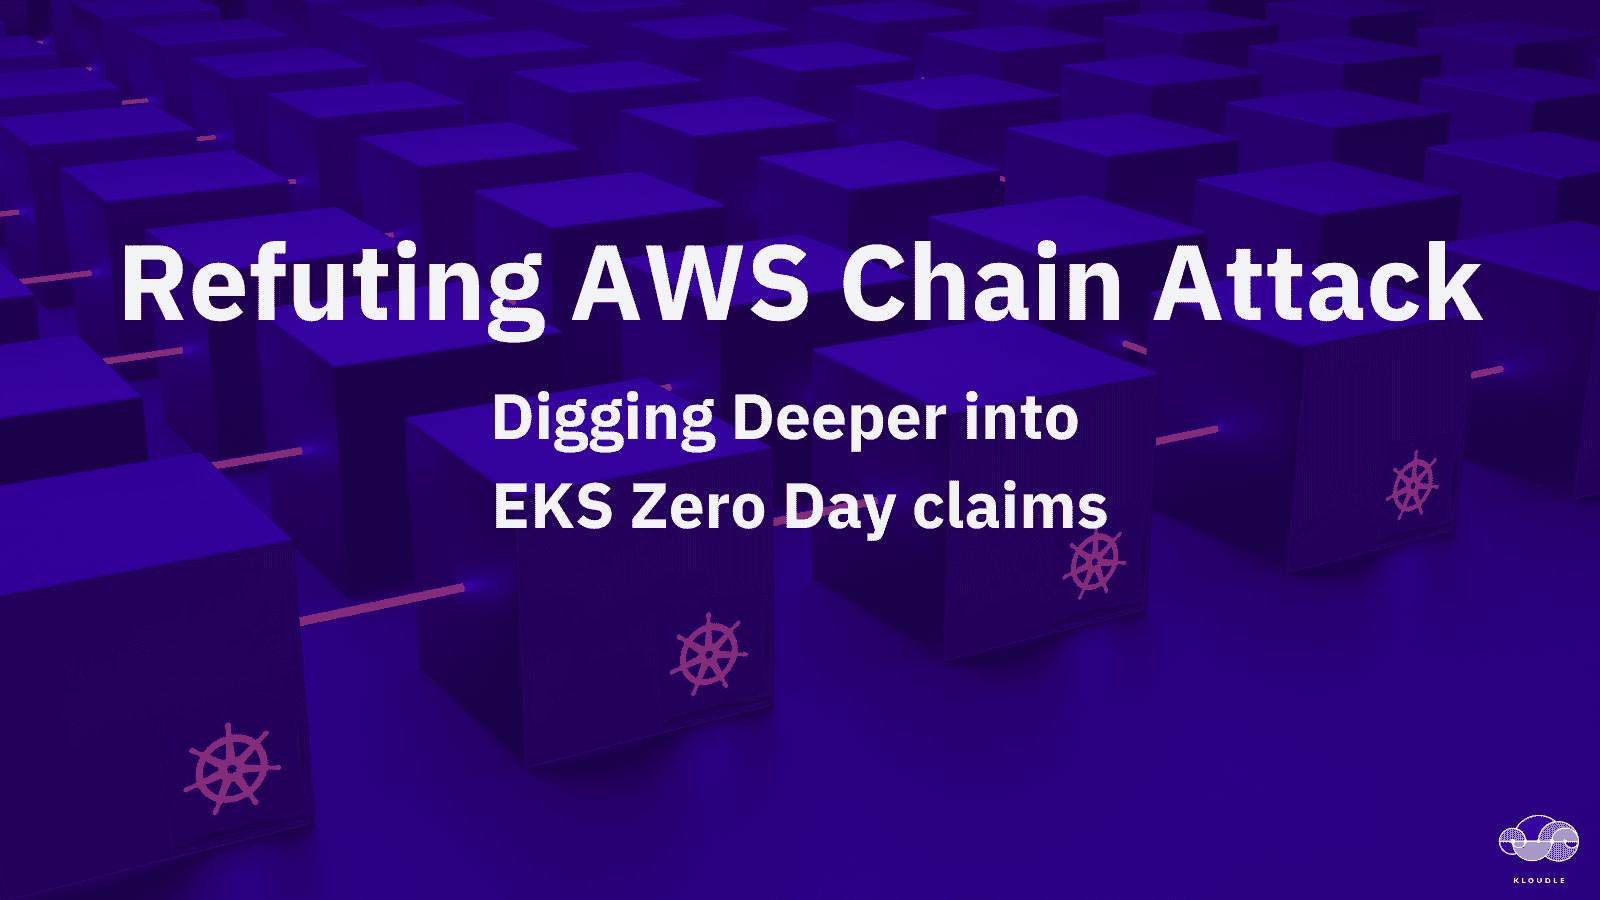 Refuting AWS Chain Attack - Digging Deeper into EKS Zero Day claims